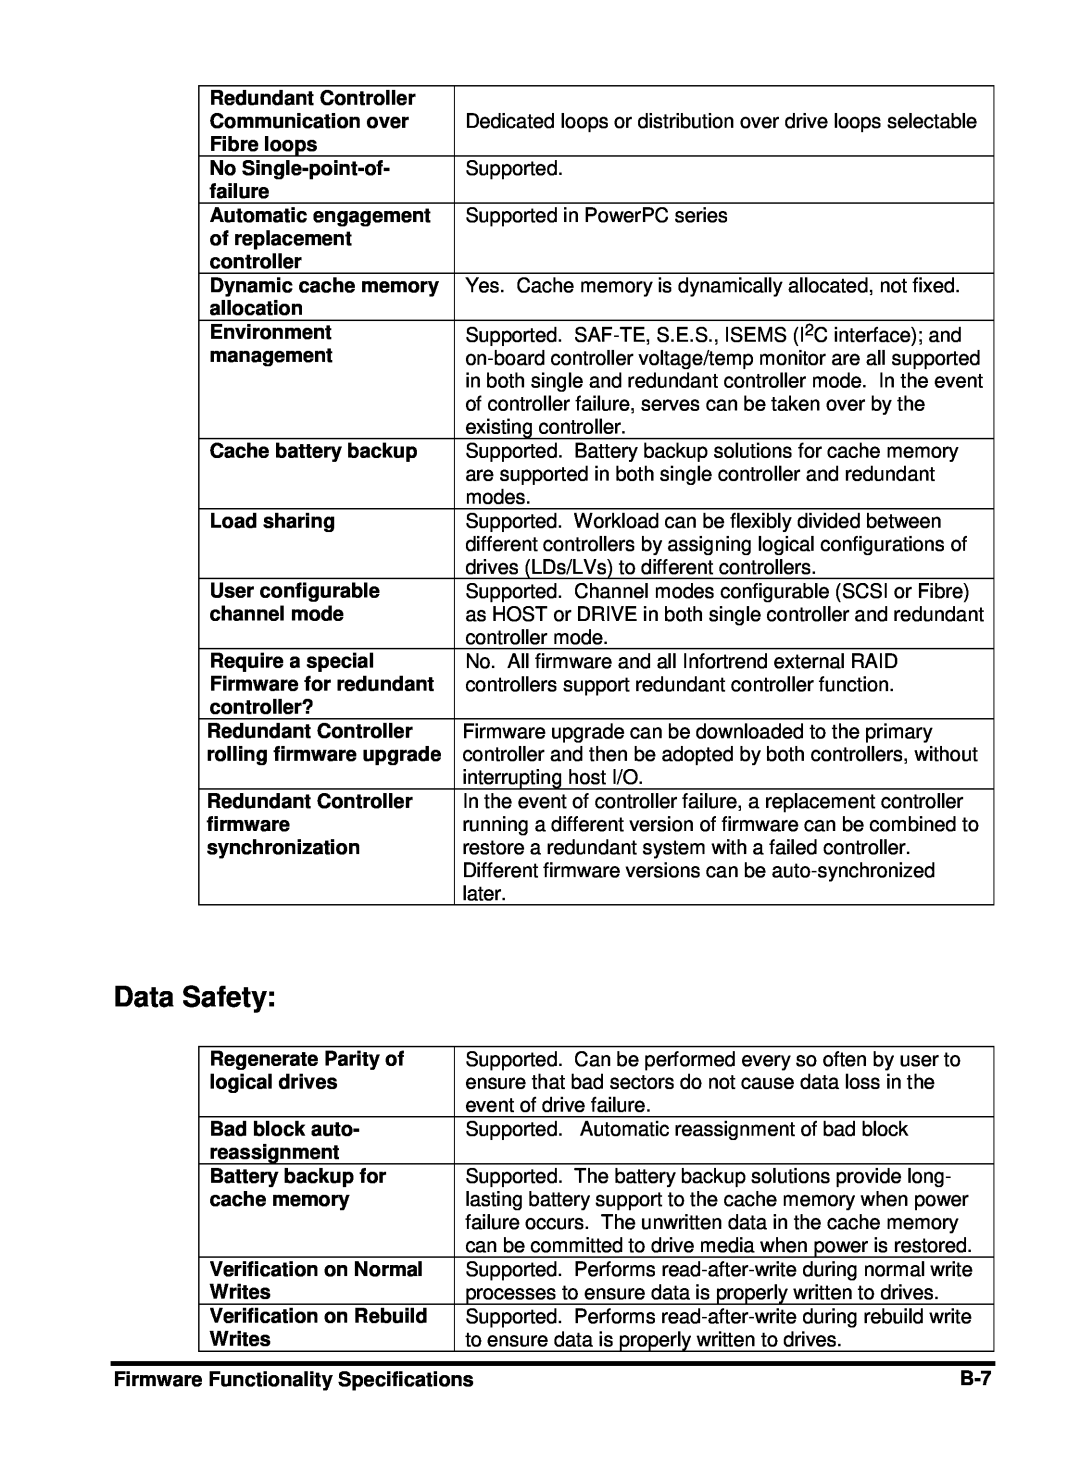 Compaq Infortrend manual Data Safety 